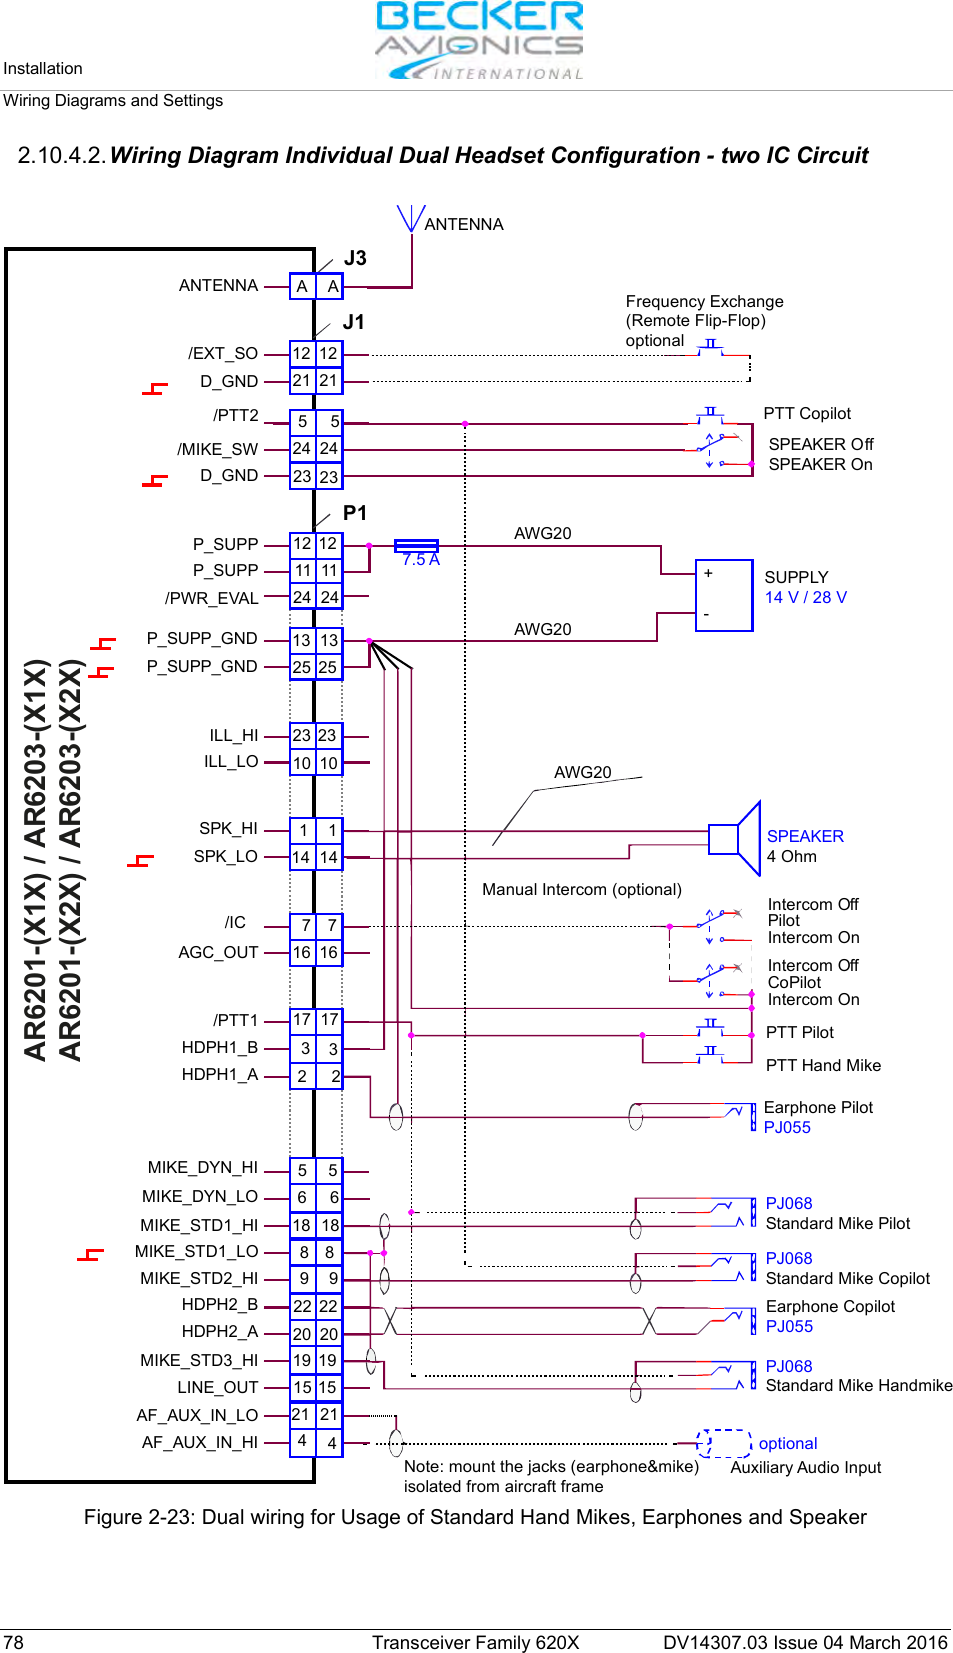 Installation   Wiring Diagrams and Settings  78 Transceiver Family 620X DV14307.03 Issue 04 March 2016 2.10.4.2. Wiring Diagram Individual Dual Headset Configuration - two IC Circuit  ANTENNAAWG207.5 A +-AWG20AWG20Manual Intercom (optional)SPEAKER4 OhmSUPPLY14 V / 28 VSPEAKER OffSPEAKER OnPTT CopilotFrequency Exchange(Remote Flip-Flop)optionalIntercom OffPilotIntercom OnIntercom OffCoPilotIntercom OnPTT PilotPTT Hand MikeEarphone PilotPJ055Earphone CopilotPJ055PJ068Standard Mike PilotPJ068Standard Mike CopilotPJ068Standard Mike HandmikeAuxiliary Audio InputNote: mount the jacks (earphone&amp;mike)isolated from aircraft frameoptionalJ3J1P1AA12 1221 215 52423 232412 1211 1124 2413 1325 2523 2310 1014 147 716 1617 17332 25 56618 18889 921 2120 2019 194415 1522 221 1ANTENNA/EXT_SO/PTT2ILL_HISPK_HISPK_LO/ICAGC_OUT/PTT1HDPH1_BHDPH1_AHDPH2_BHDPH2_AMIKE_DYN_LOMIKE_DYN_HIMIKE_STD1_HIMIKE_STD2_HIMIKE_STD3_HILINE_OUTAF_AUX_IN_LOAF_AUX_IN_HIMIKE_STD1_LOILL_LO/MIKE_SWD_GNDD_GNDP_SUPPP_SUPP_GNDP_SUPP_GNDP_SUPP/PWR_EVALAR6201-(X1X) / AR6203-(X1X)AR6201-(X2X) / AR6203-(X2X) Figure 2-23: Dual wiring for Usage of Standard Hand Mikes, Earphones and Speaker  